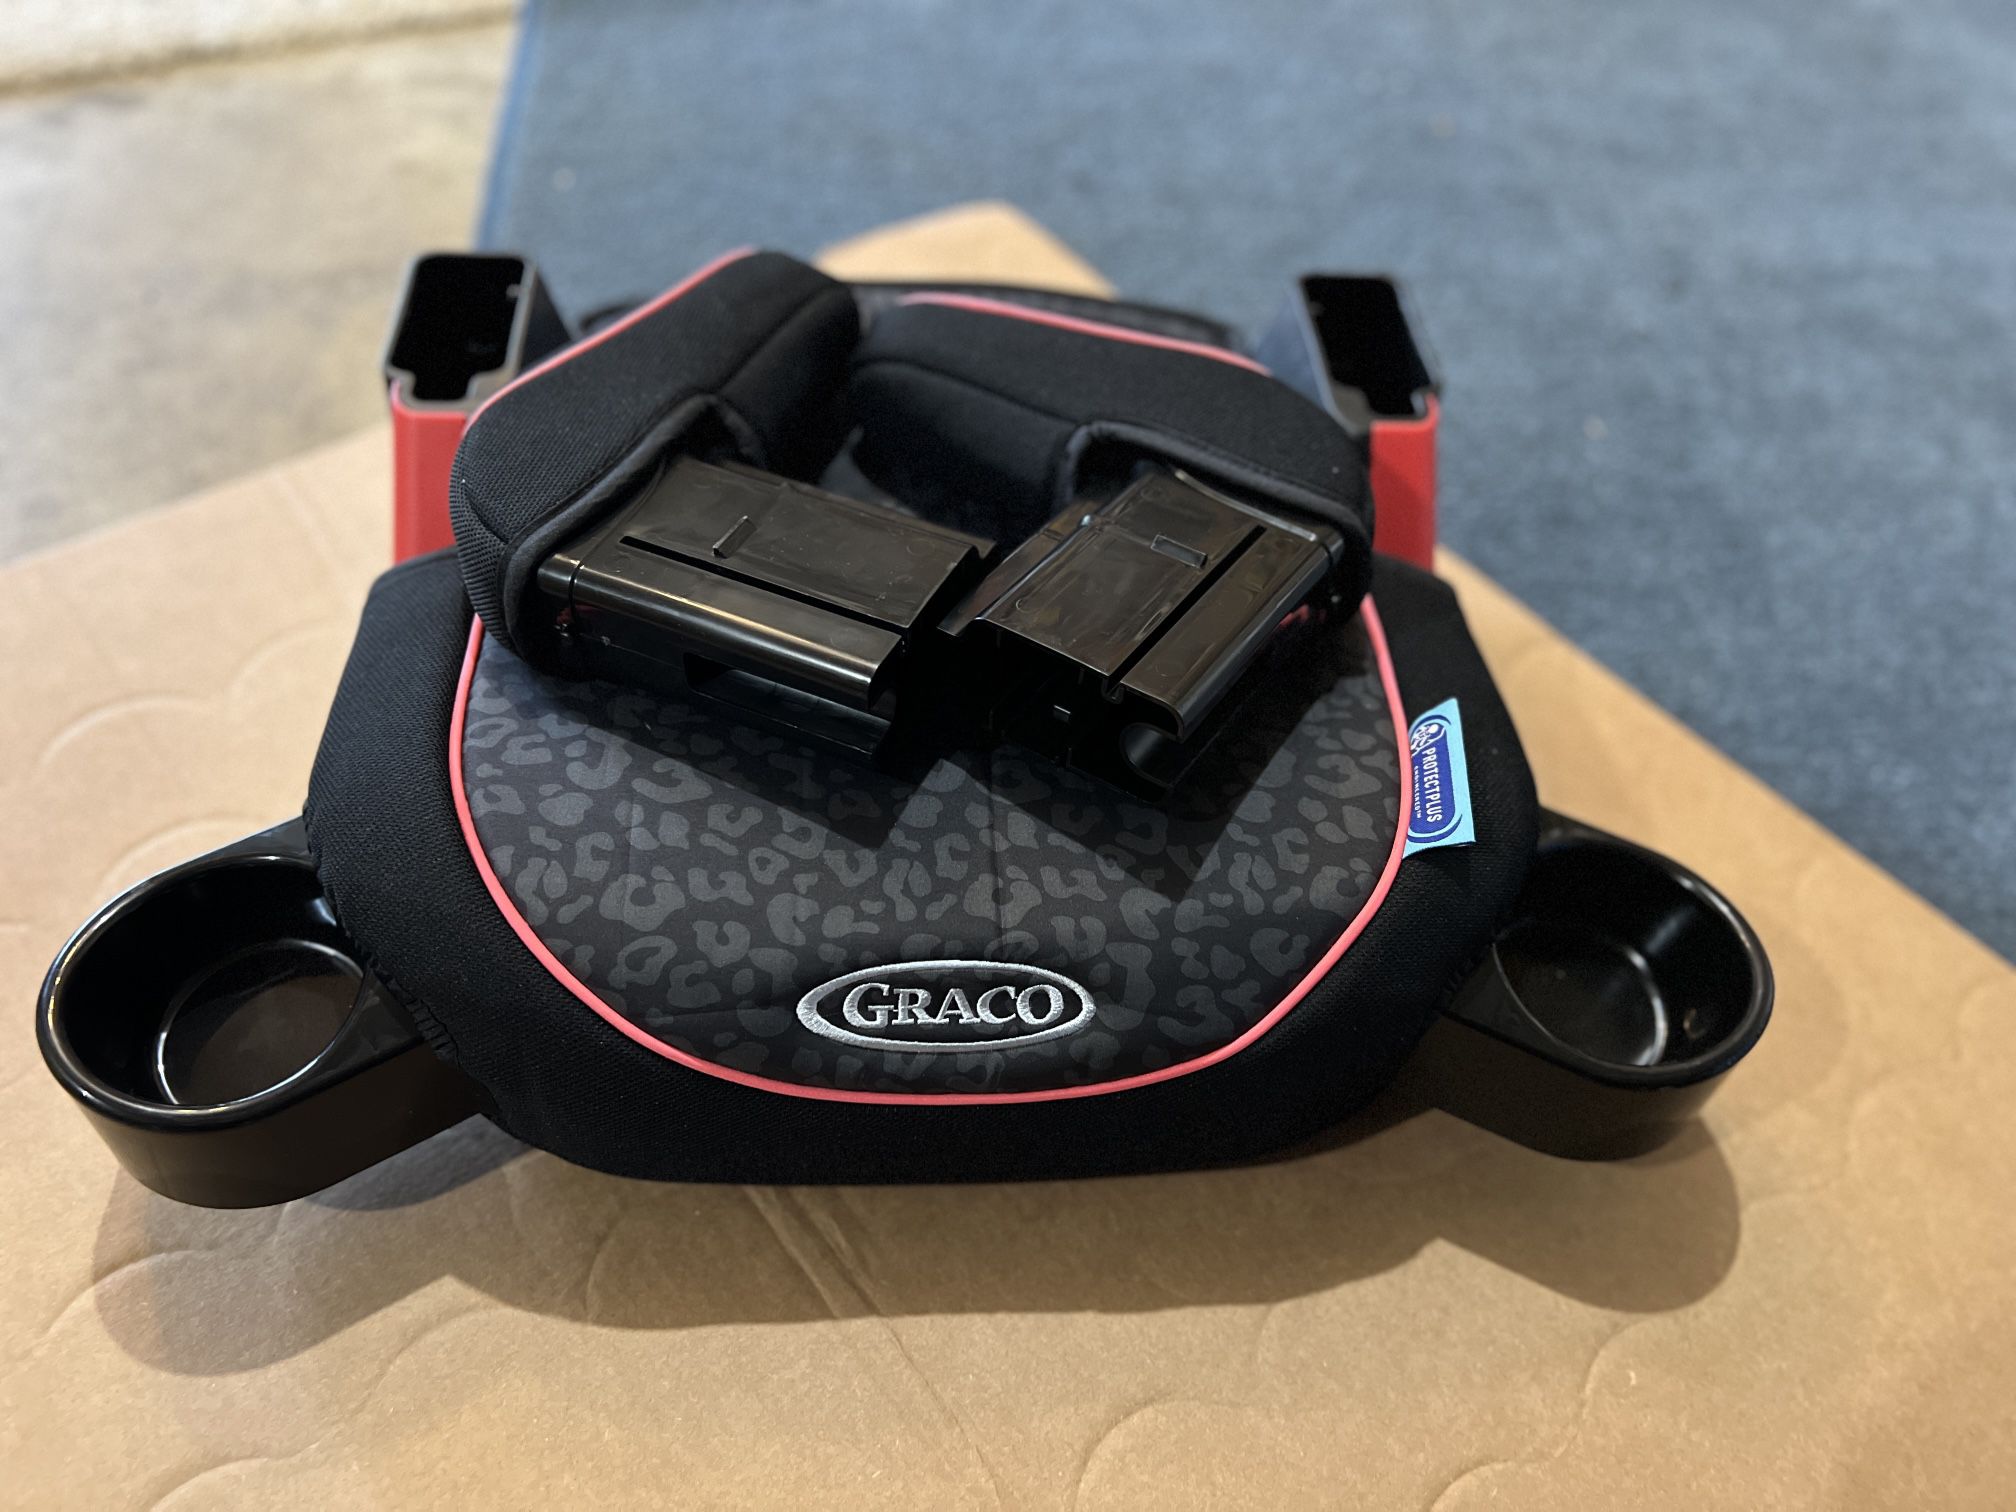 New Booster Seat Graco